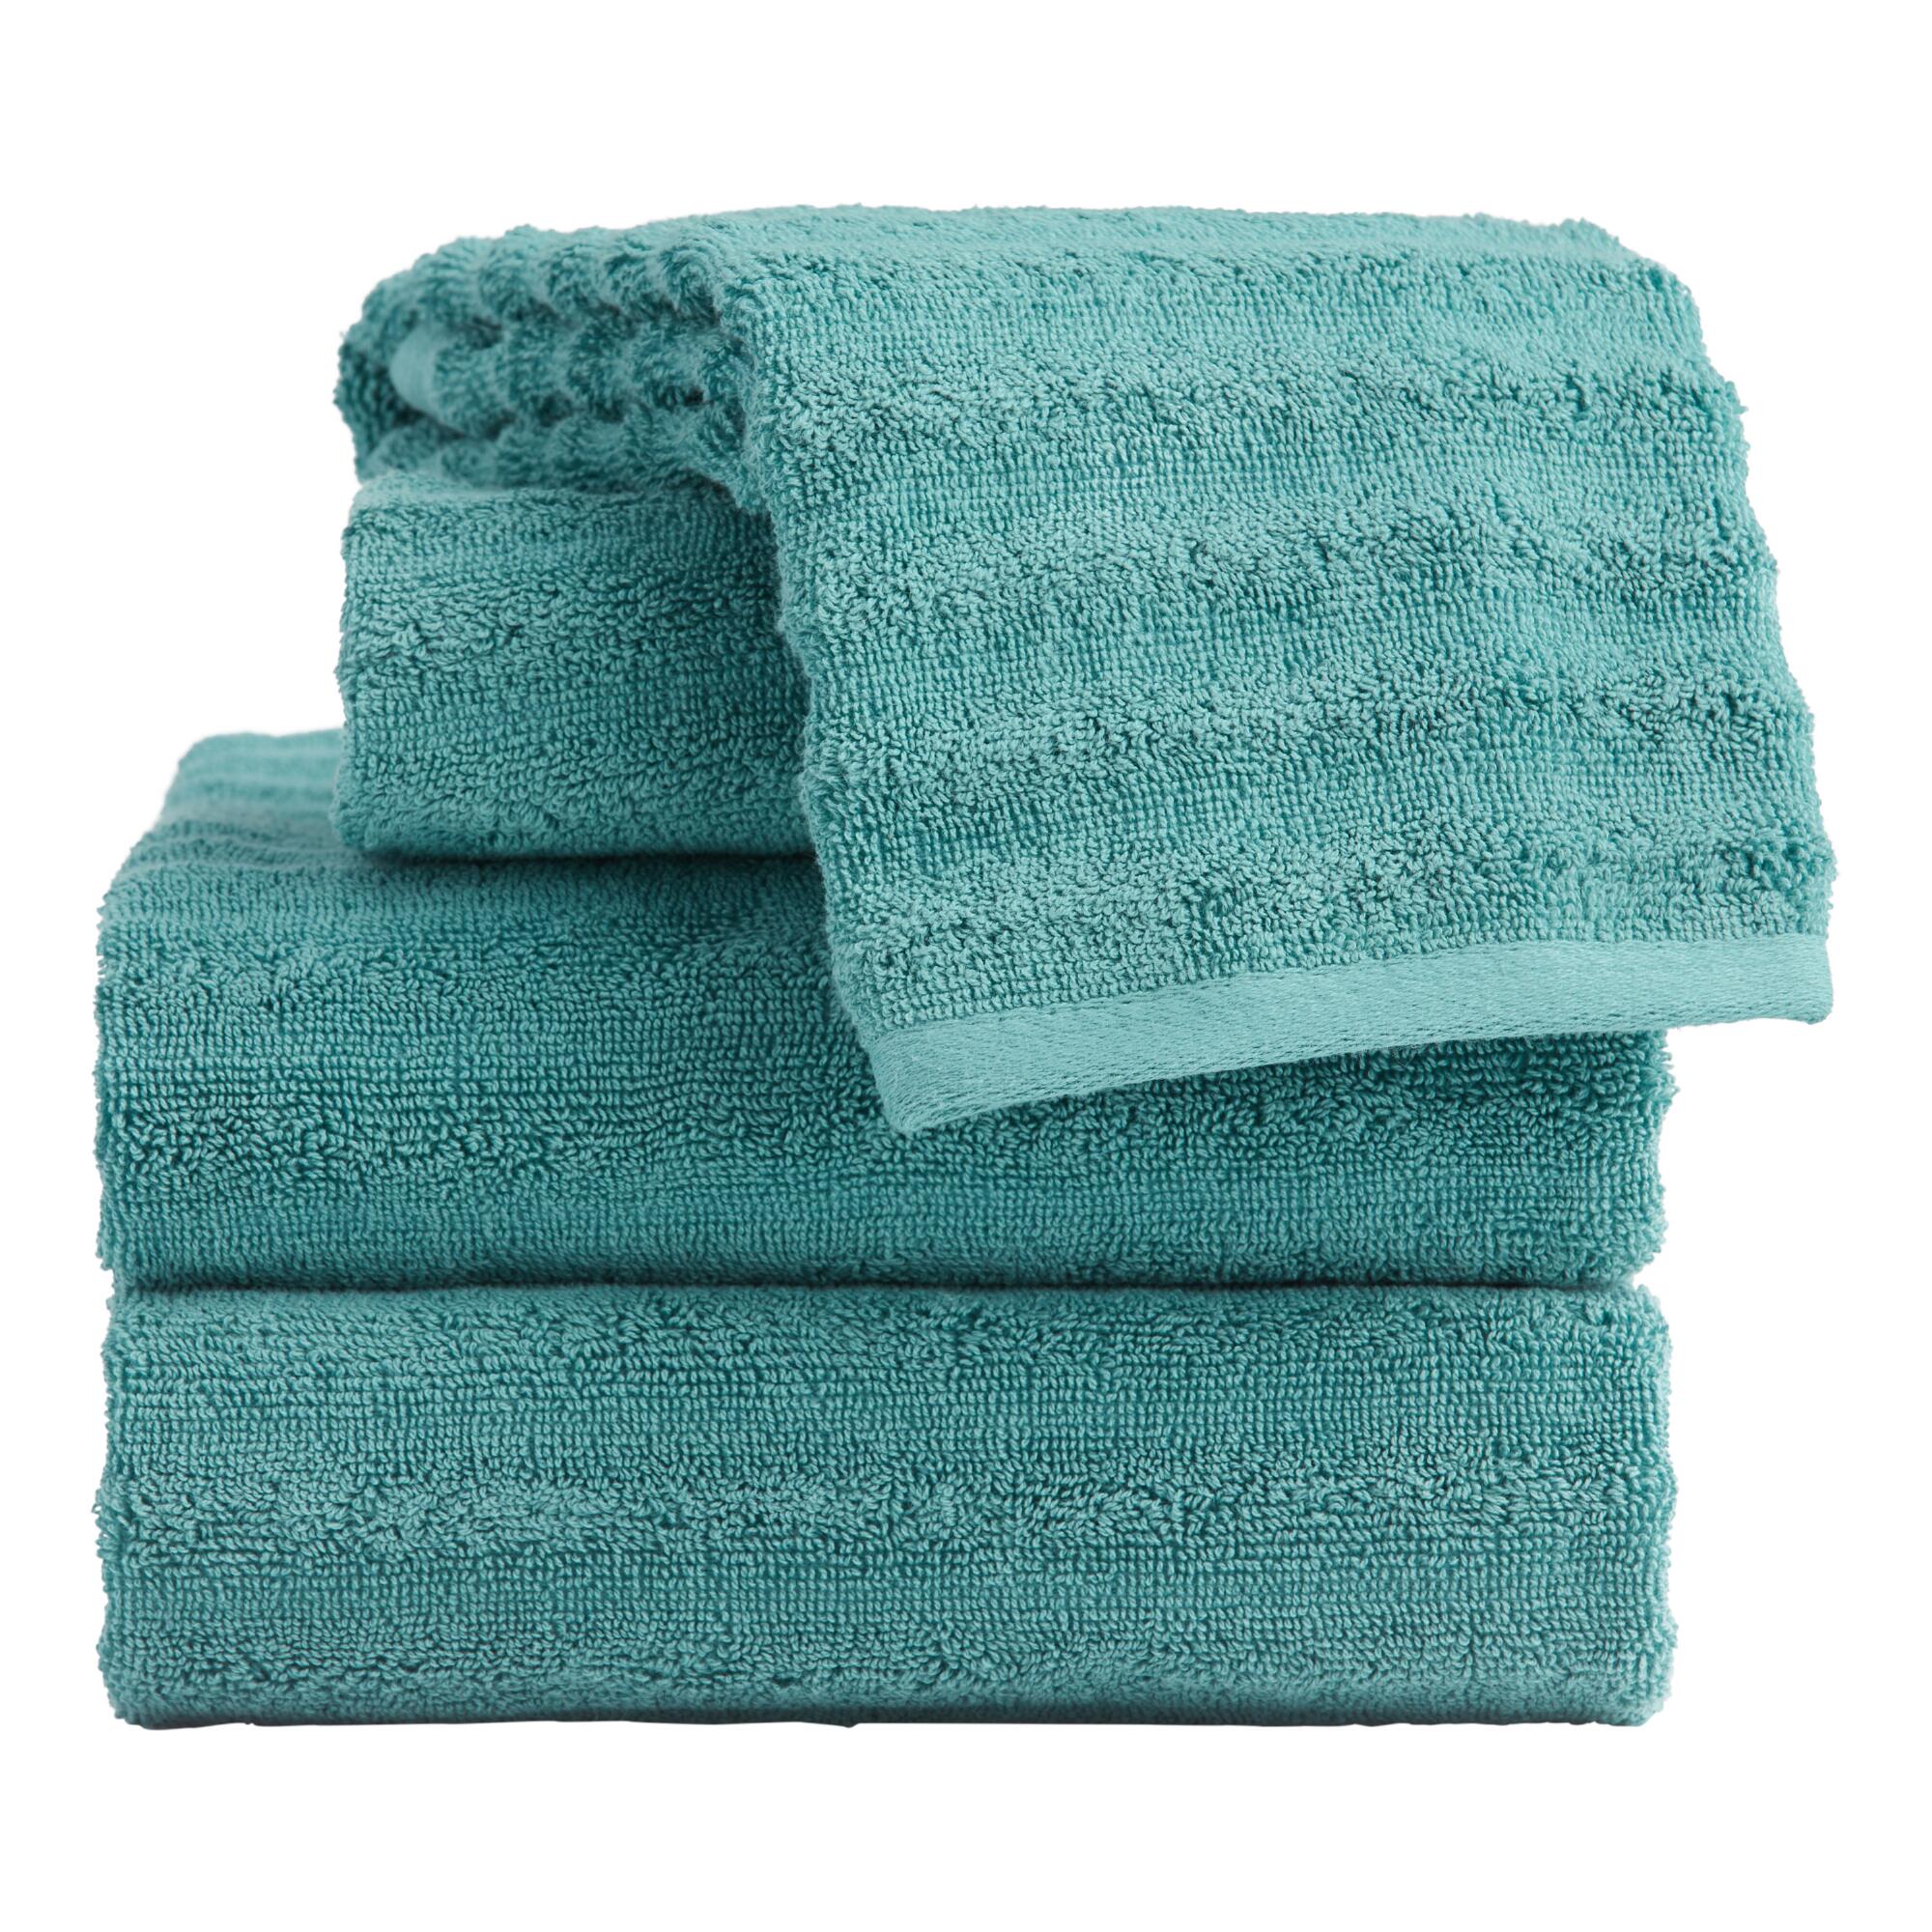 Mineral Blue Sculpted Wave Towel Collection by World Market